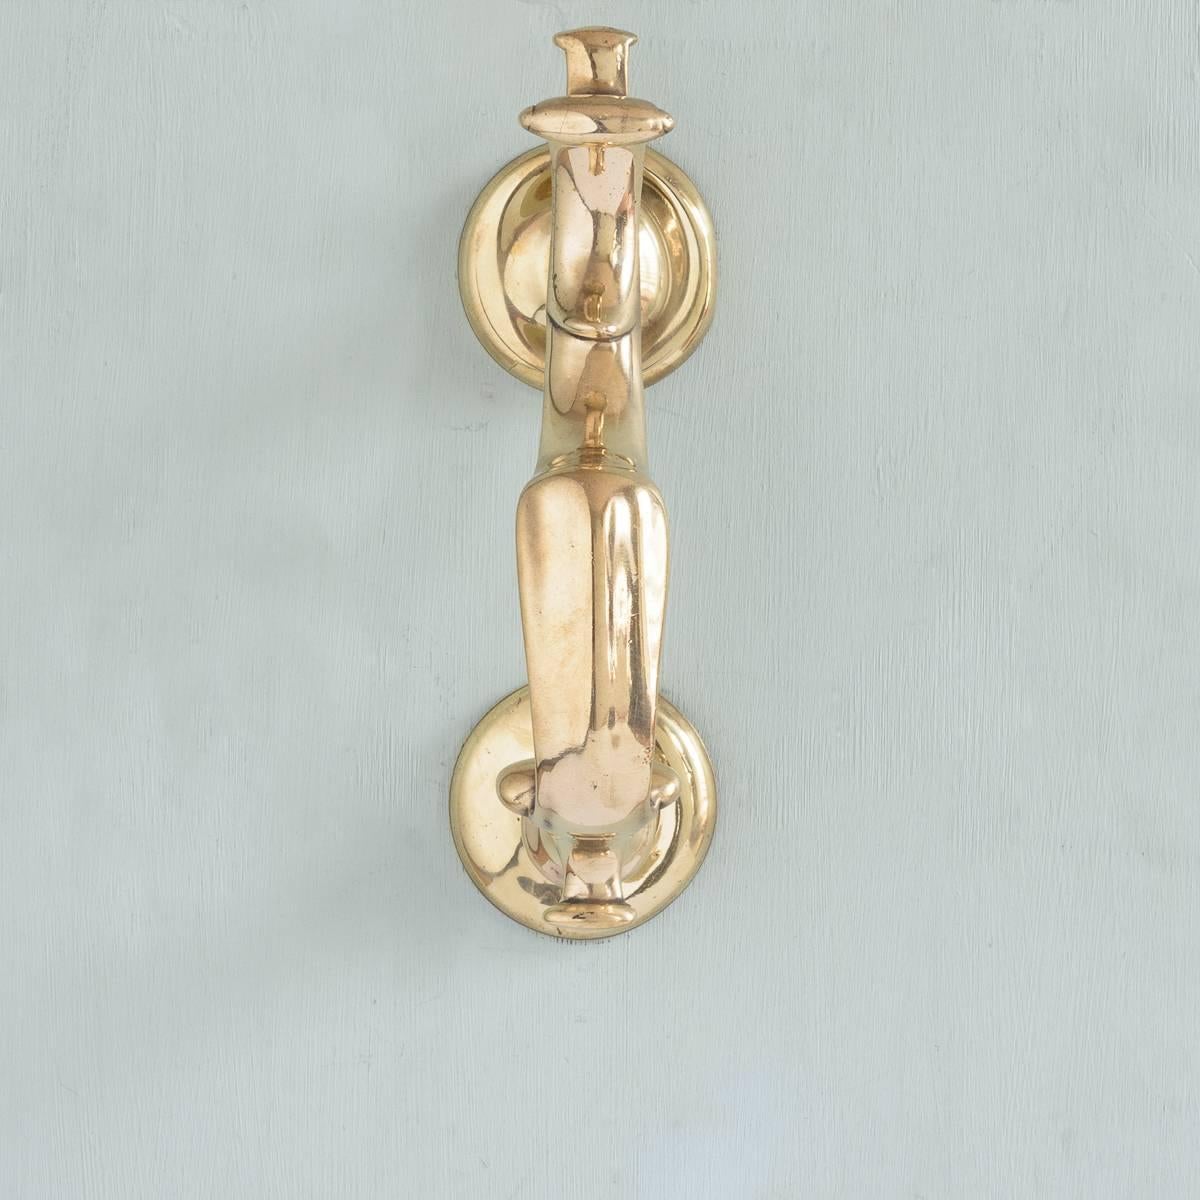 An 18th century Georgian brass doctor's door knocker, circa 1780, with typical s-shaped scrolled rapper.